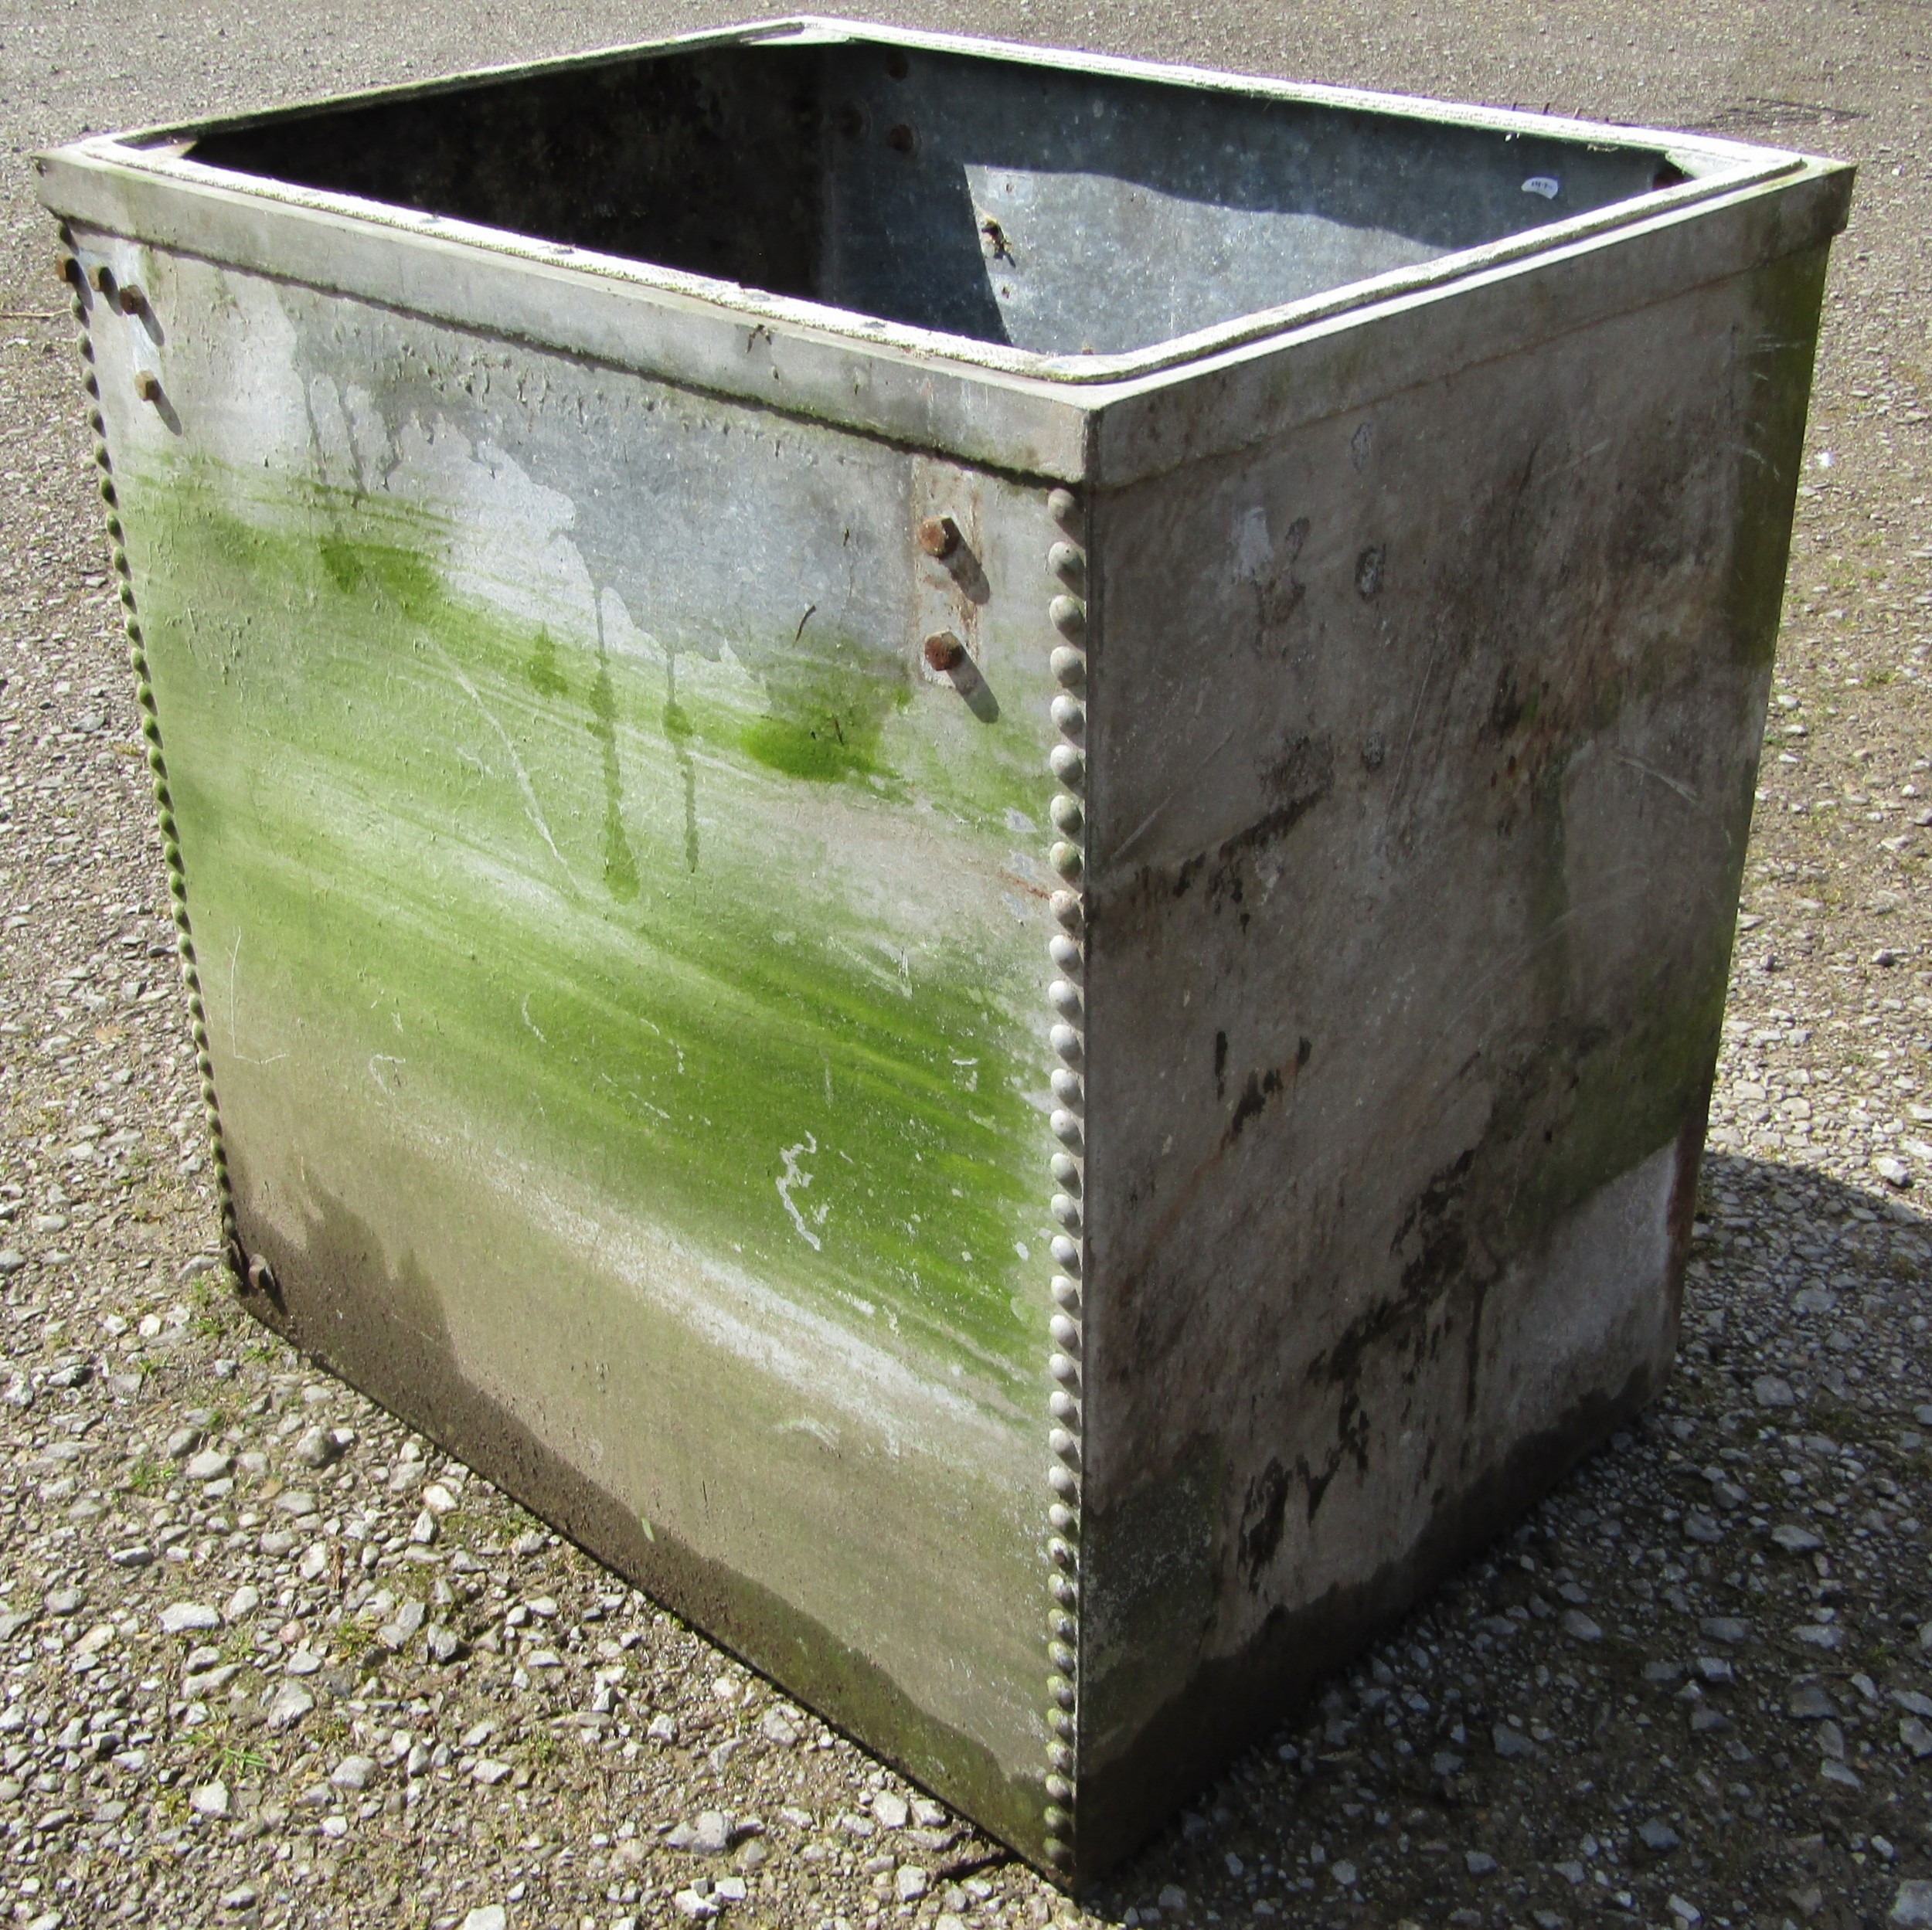 A vintage heavy gauge galvanised steel tank of rectangular form with pop riveted seams, 92 cm high x - Image 3 of 4